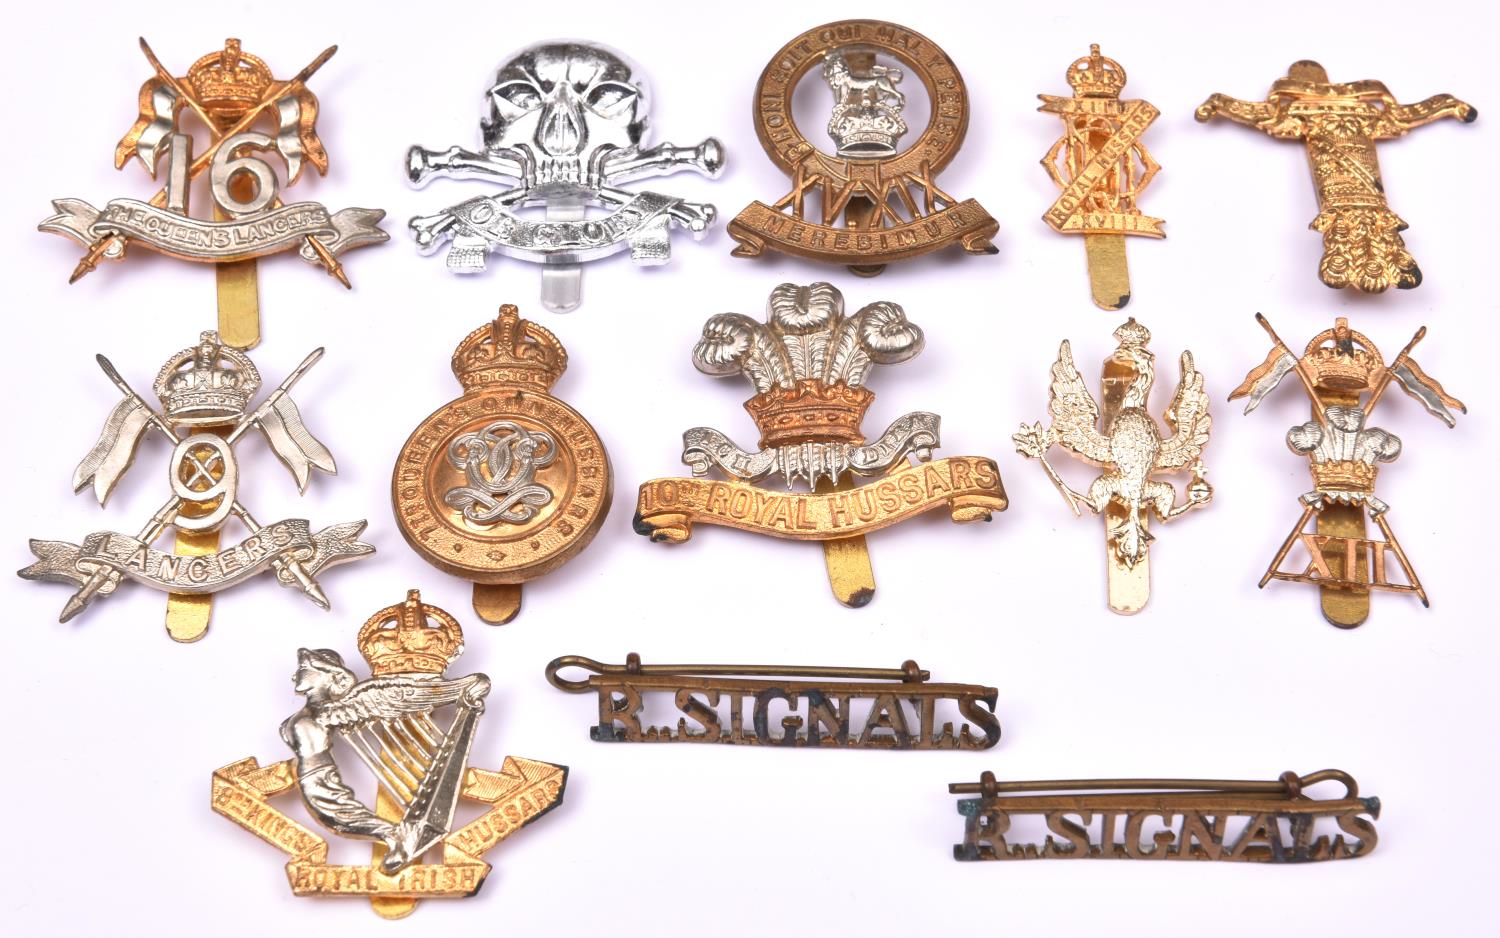 9 immediately post WWII period cavalry cap badges: 7th Hussars, 8th Hussars, 9th Lancers, 10th